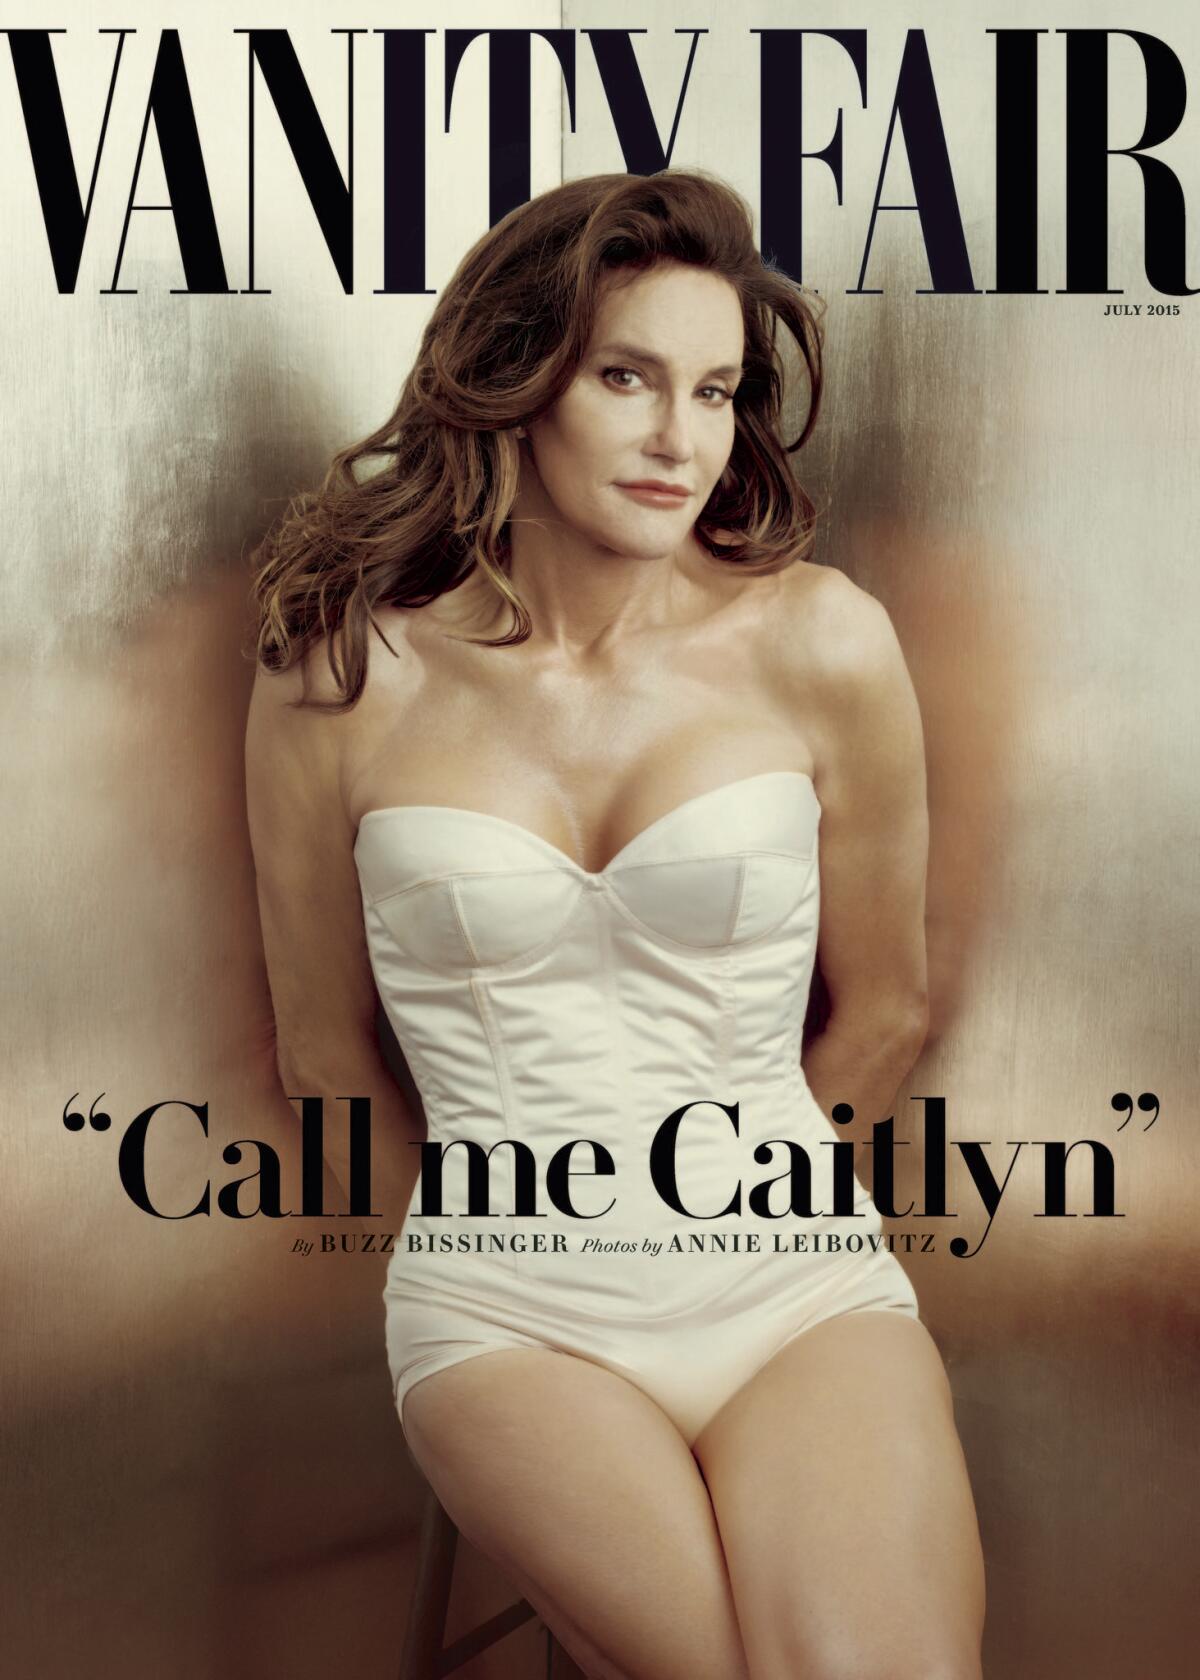 Annie Leibovitz's photograph of Caitlyn Jenner on the cover of Vanity Fair's July 2015 issue.